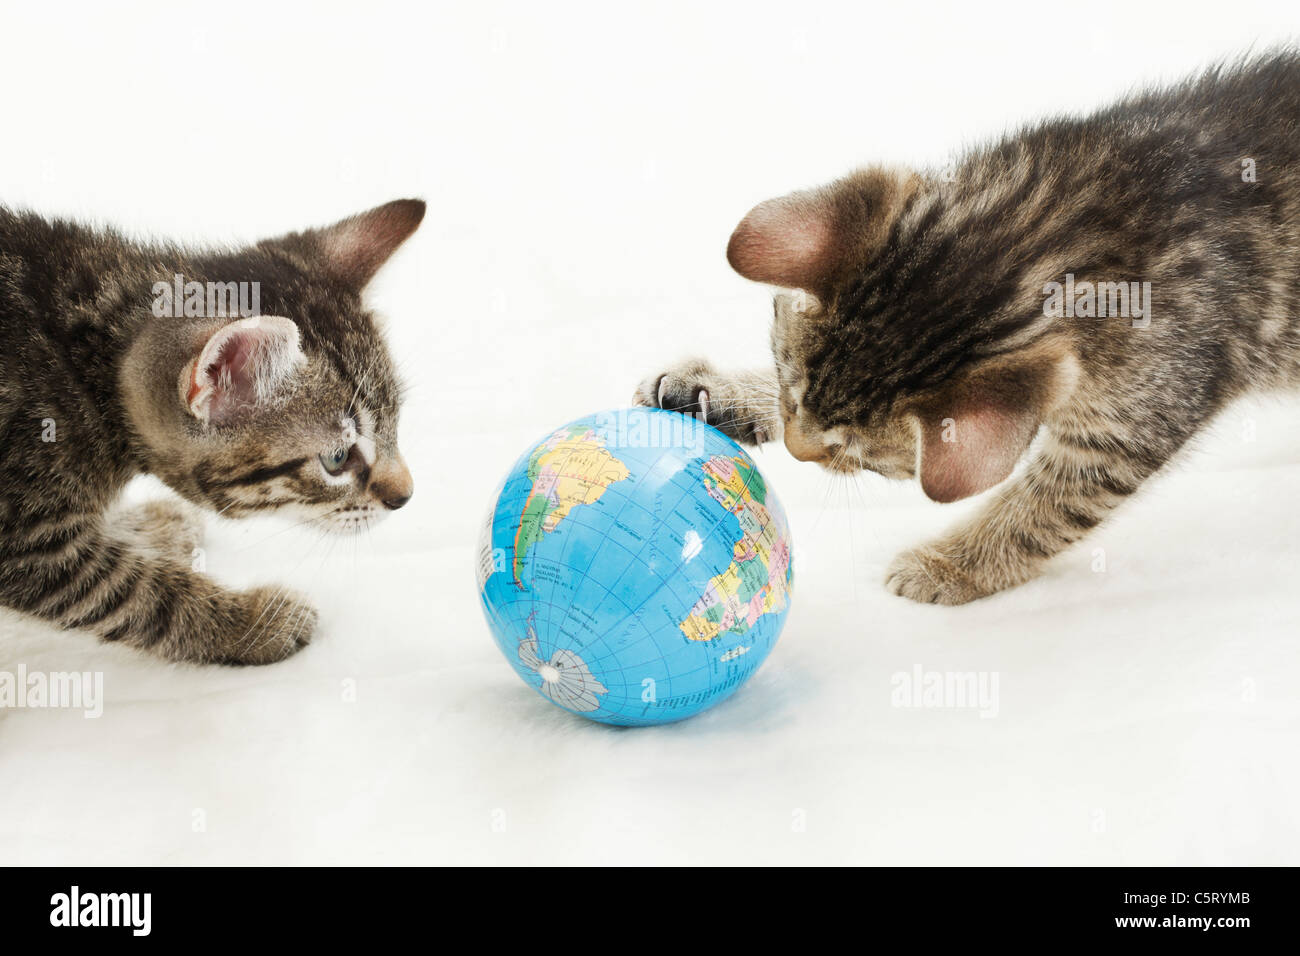 Domestic cats, kitten playing with globe Stock Photo